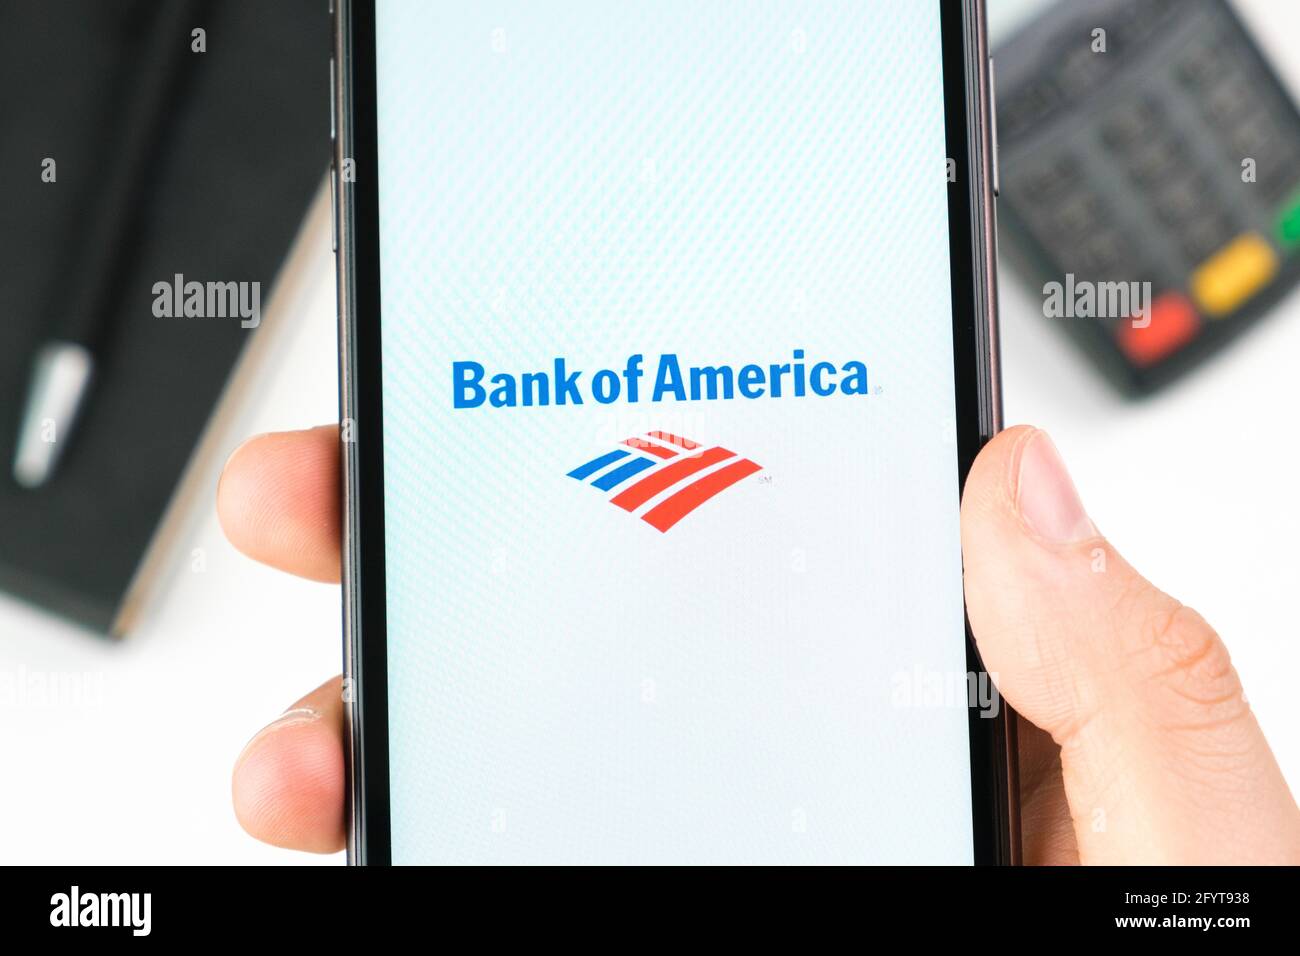 Bank of America logo on the smartphone screen in mans hand on the background of payment terminal, May 2021, San Francisco, USA Stock Photo